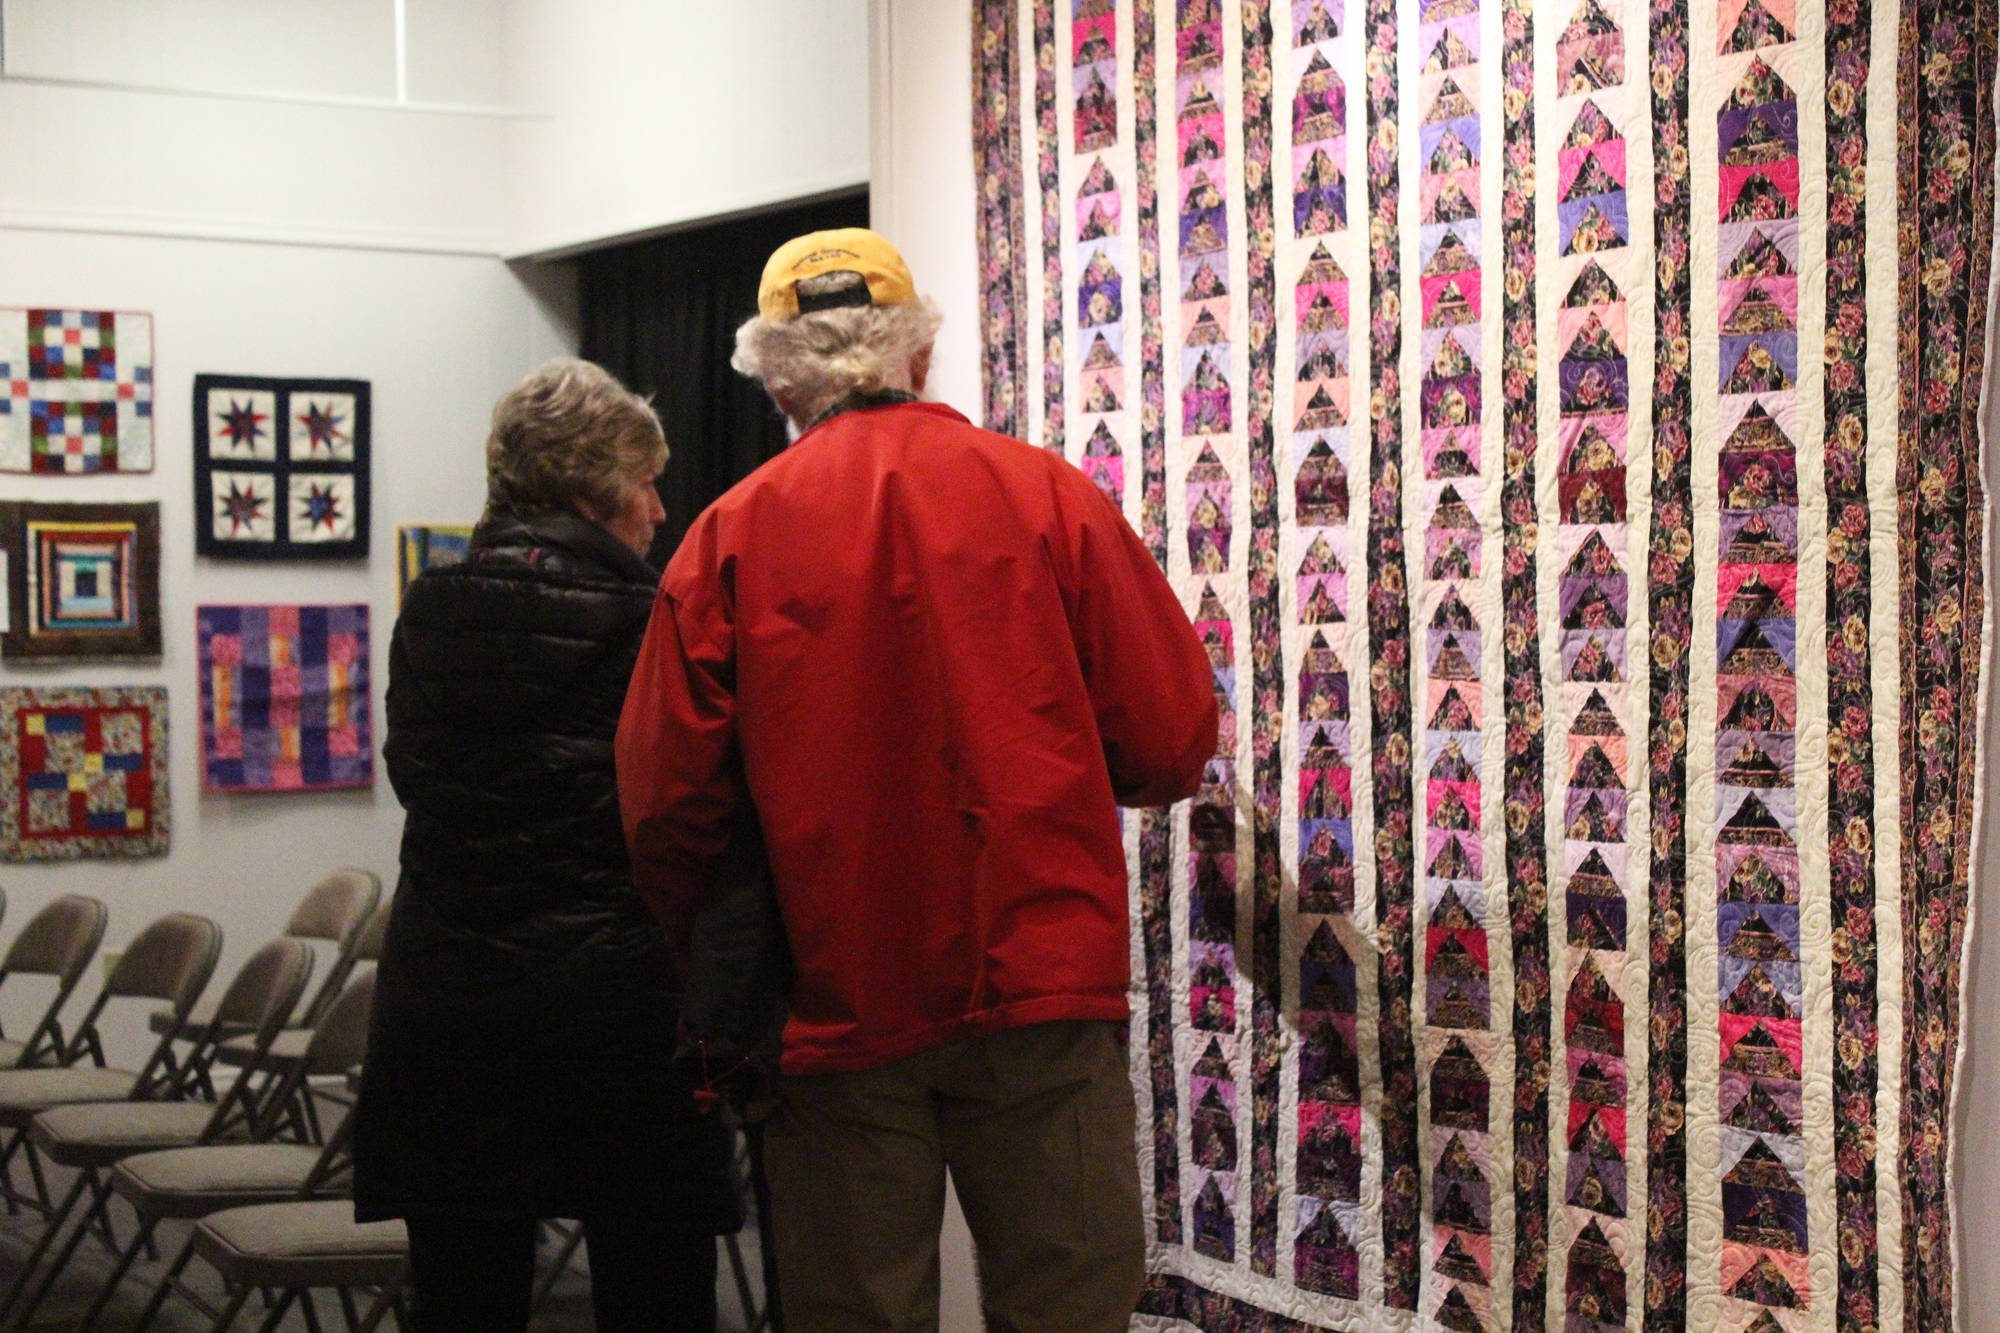 Passersby inspect the work of the Kachemak Bay Quilters during a First Friday exhibit Friday, Nov. 3, 2017 at the Homer Council on the Arts in Homer, Alaska. The quilting group has been around for more than 30 years. (Photo by Megan Pacer/Homer News)